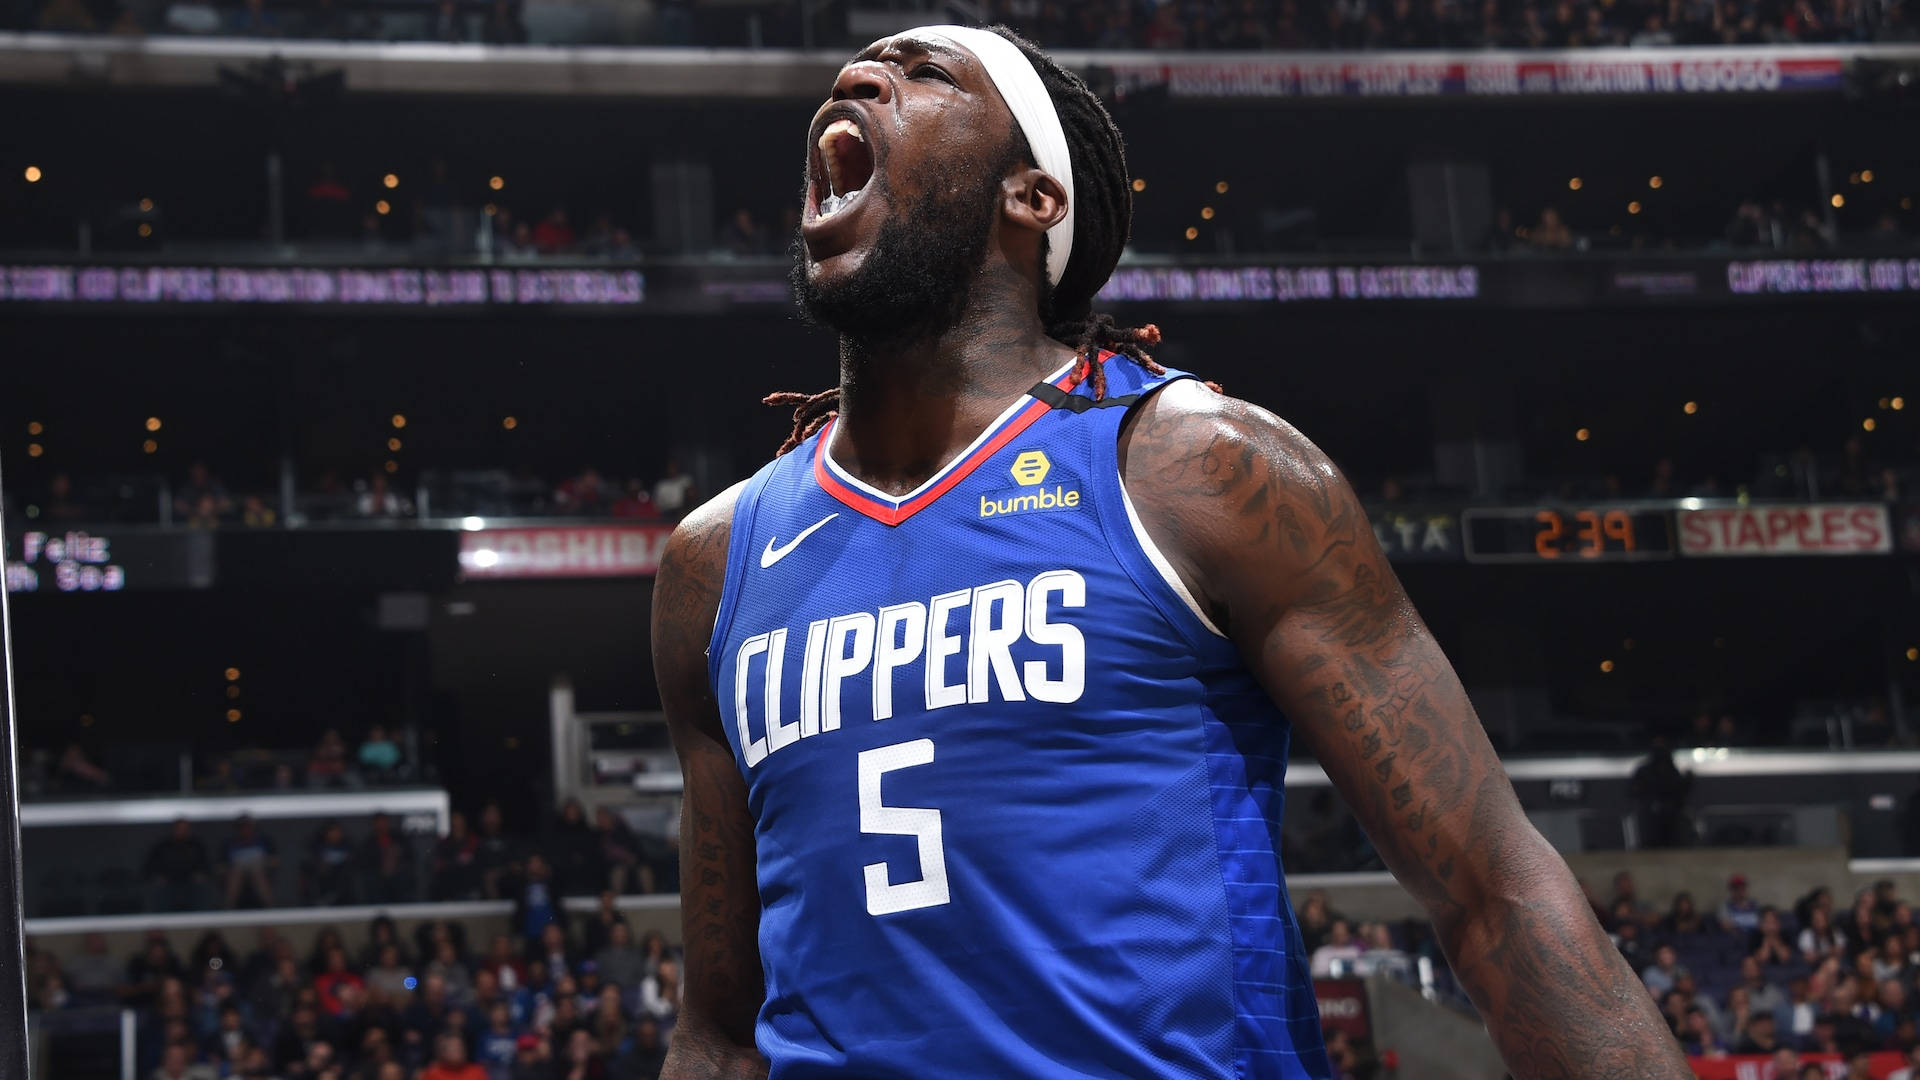 Clippers Montrezl Harrell Screaming On Court Background